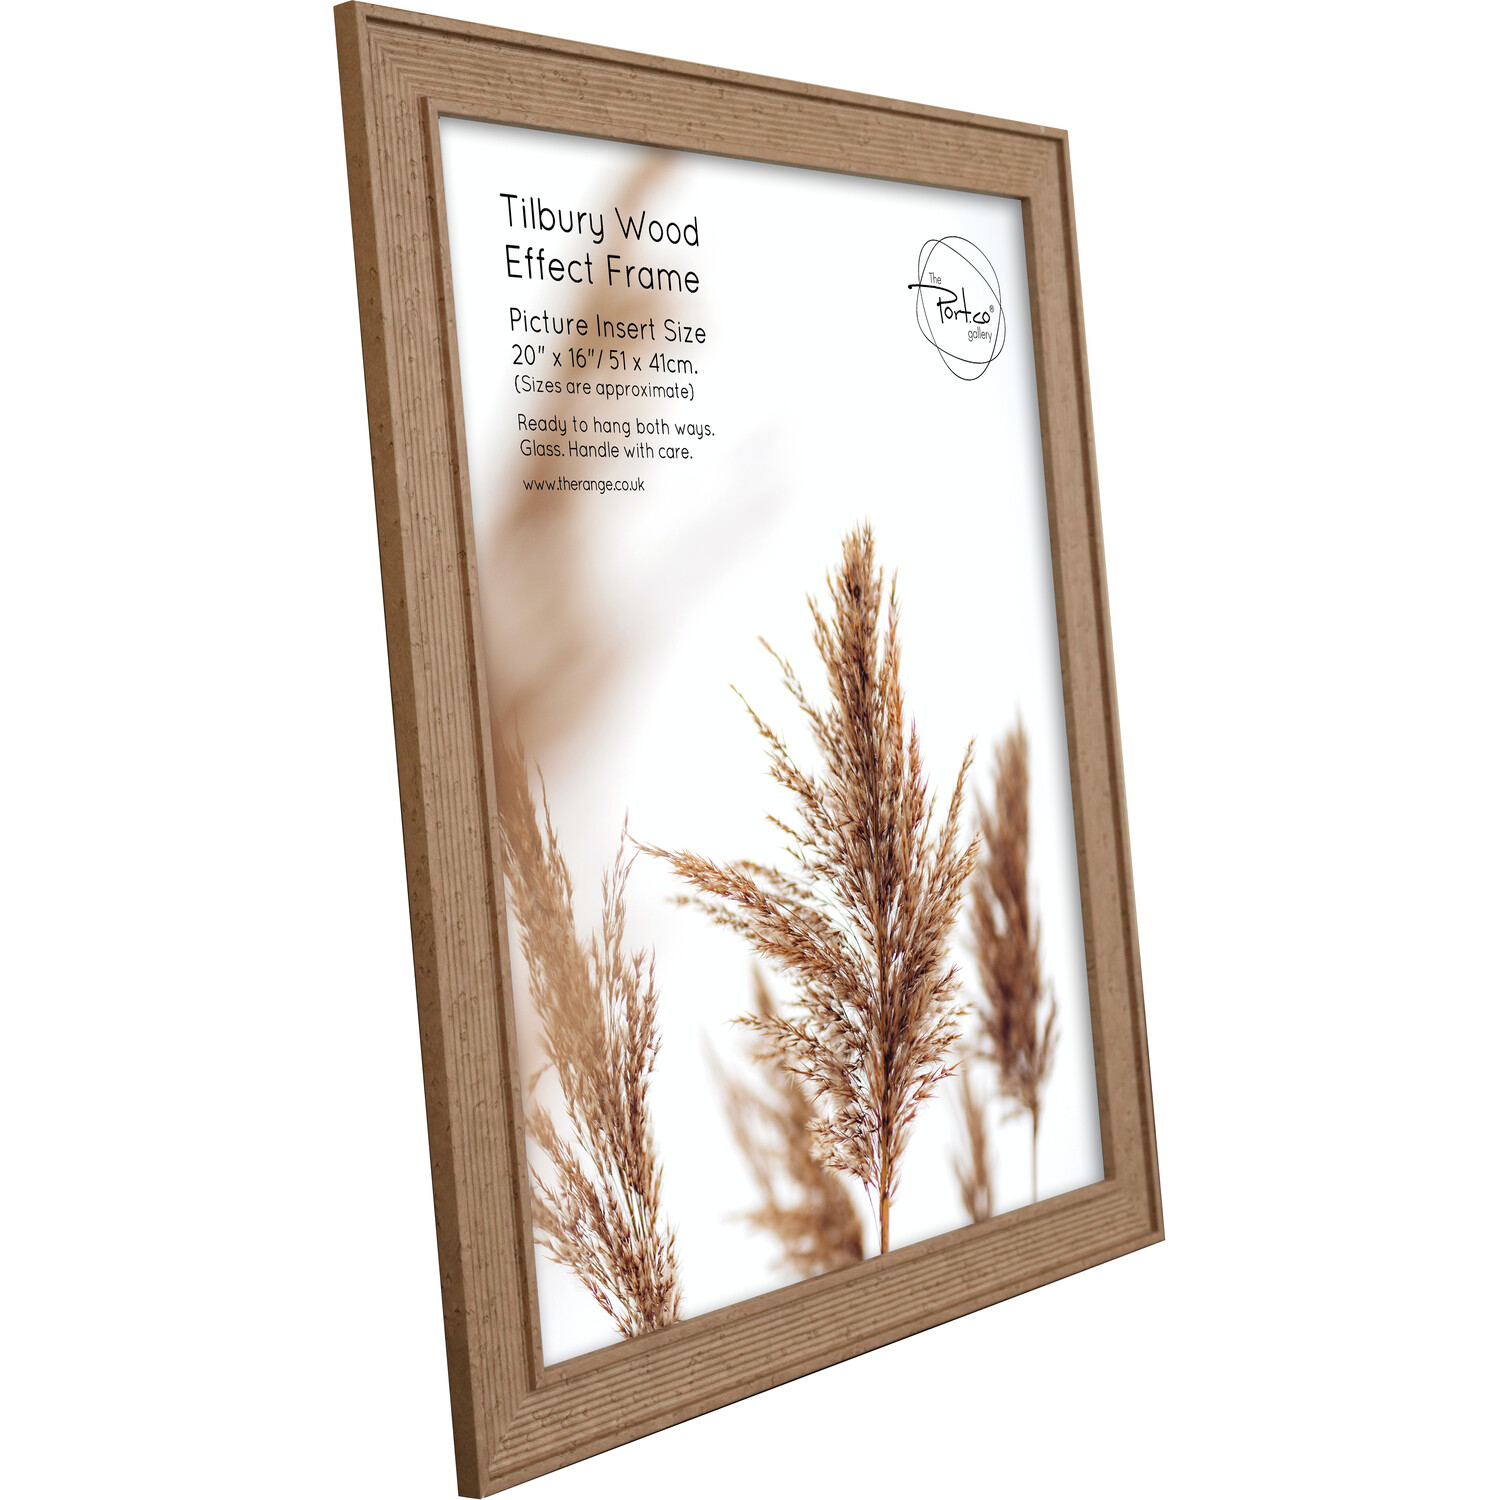 The Port. Co Gallery Tilbury Wood Effect Photo Frame 20 x 16 inch Image 2